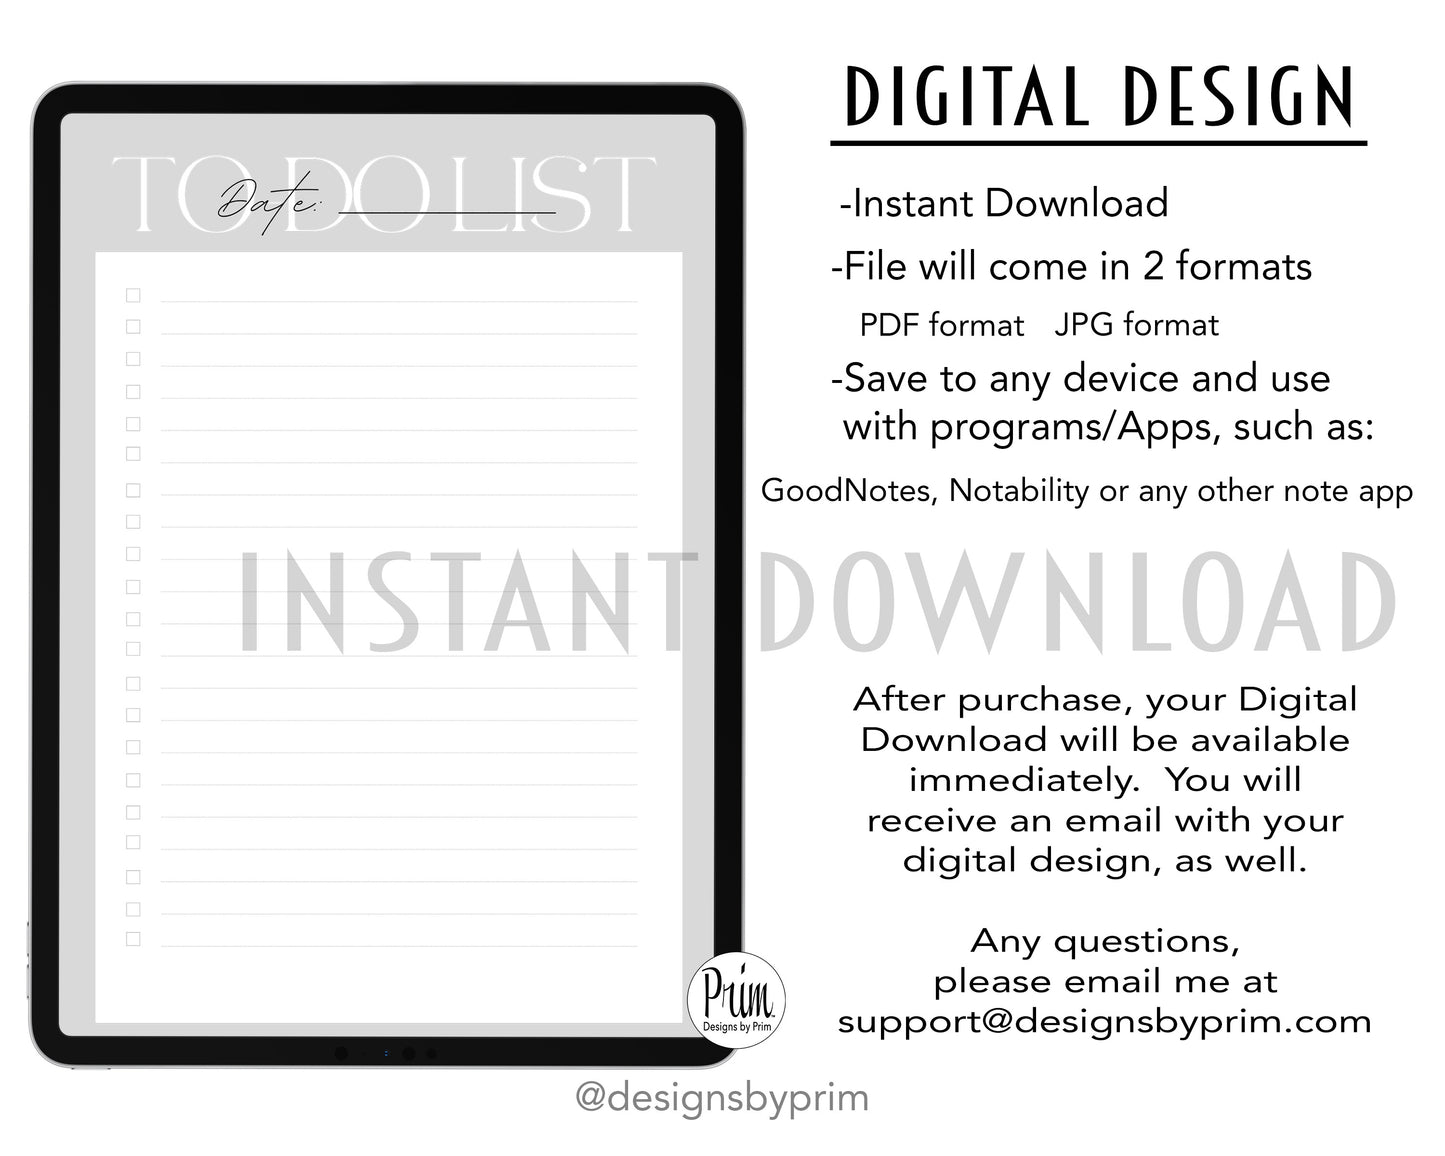 Designs by Prim To-Do List Digital Printable Planner Gray | Daily Planner Productivity Tool Task Management Time Manager Checklist Organizer Personal Task